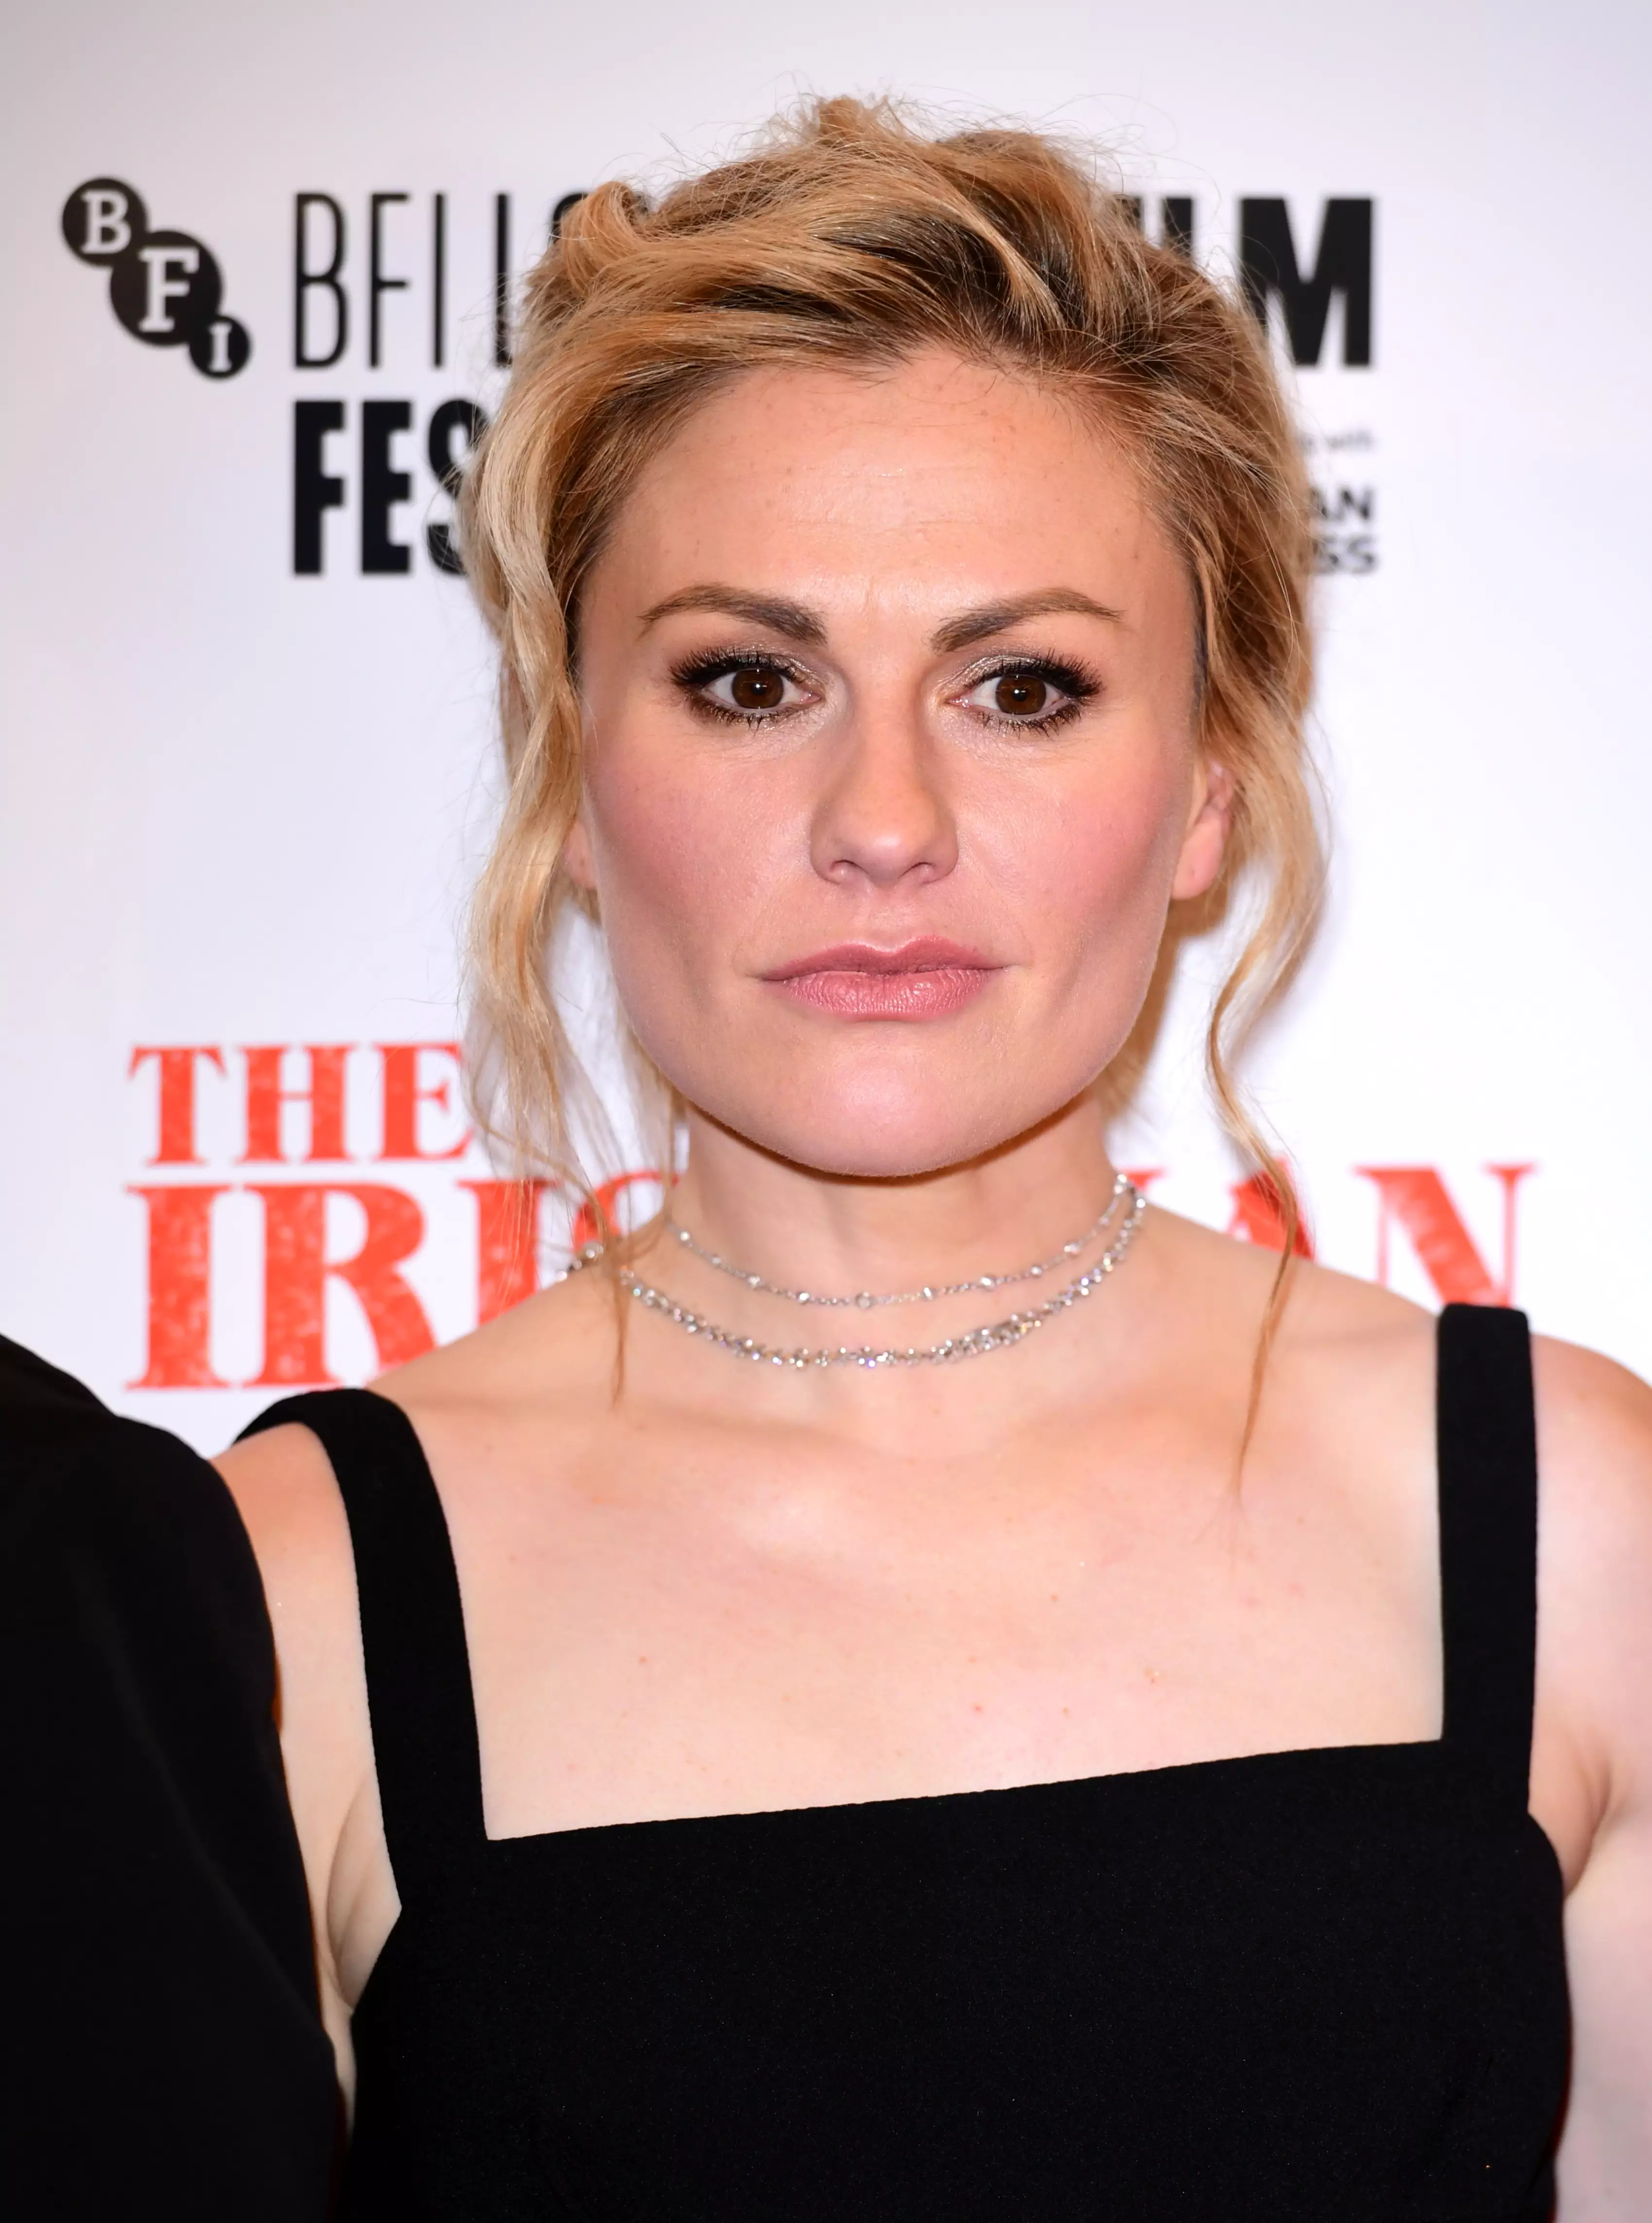 Anna Paquin has also been cast (